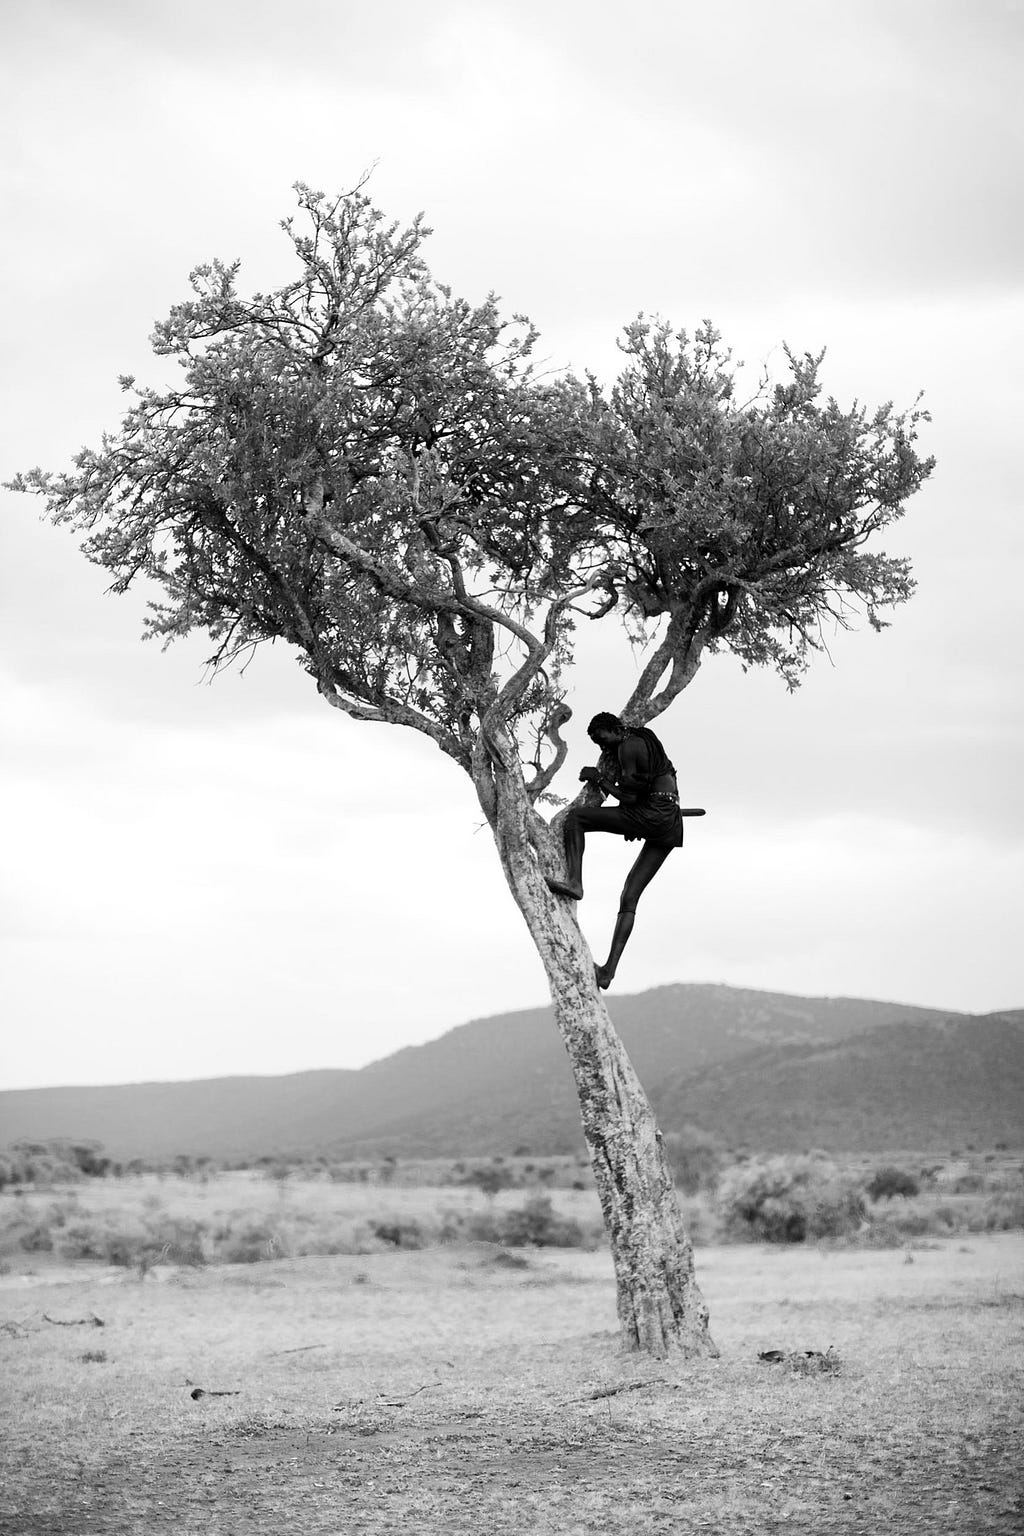 A warrior climbs an acacia tree after spear-throwing practice goes awry.